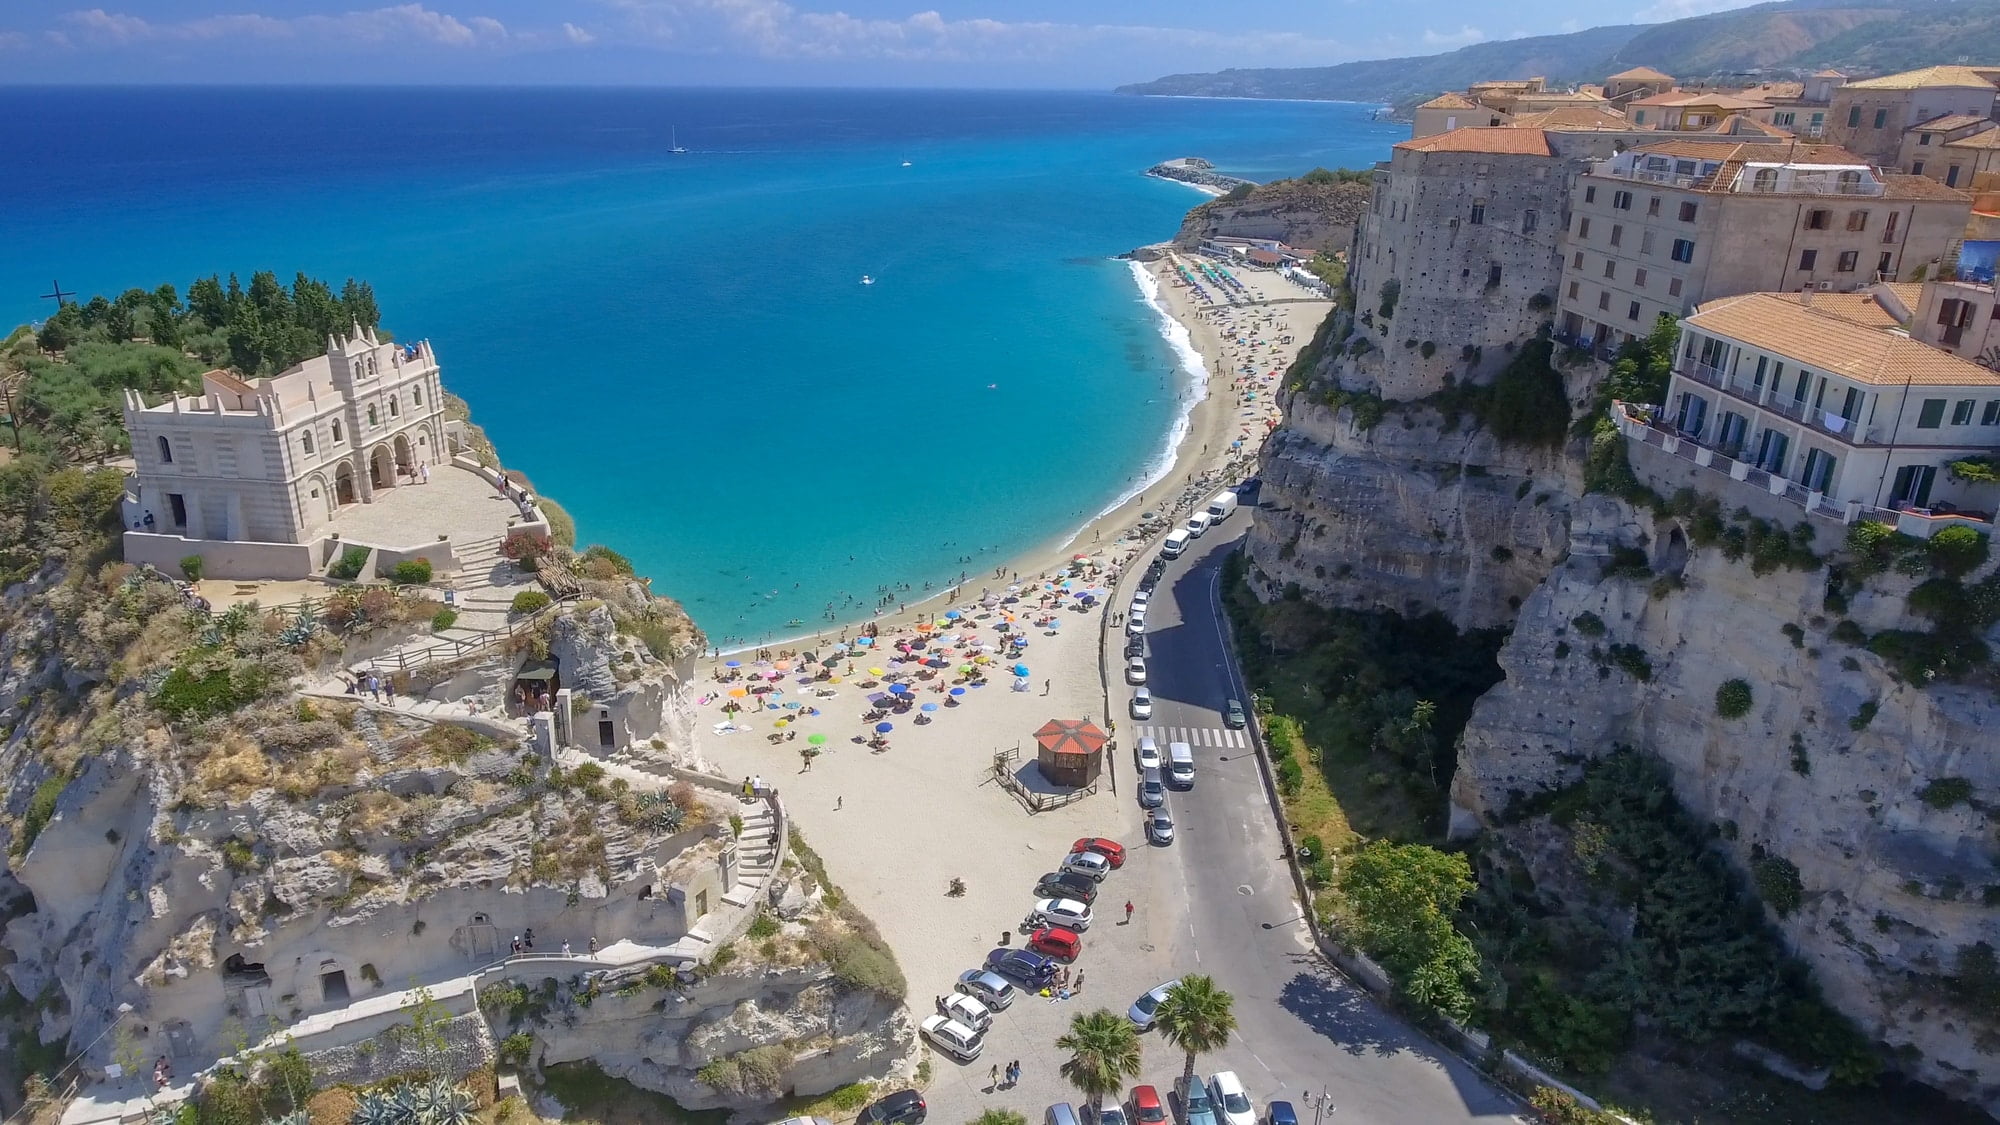 coastline and beaches in summer, Calabria - Italy.